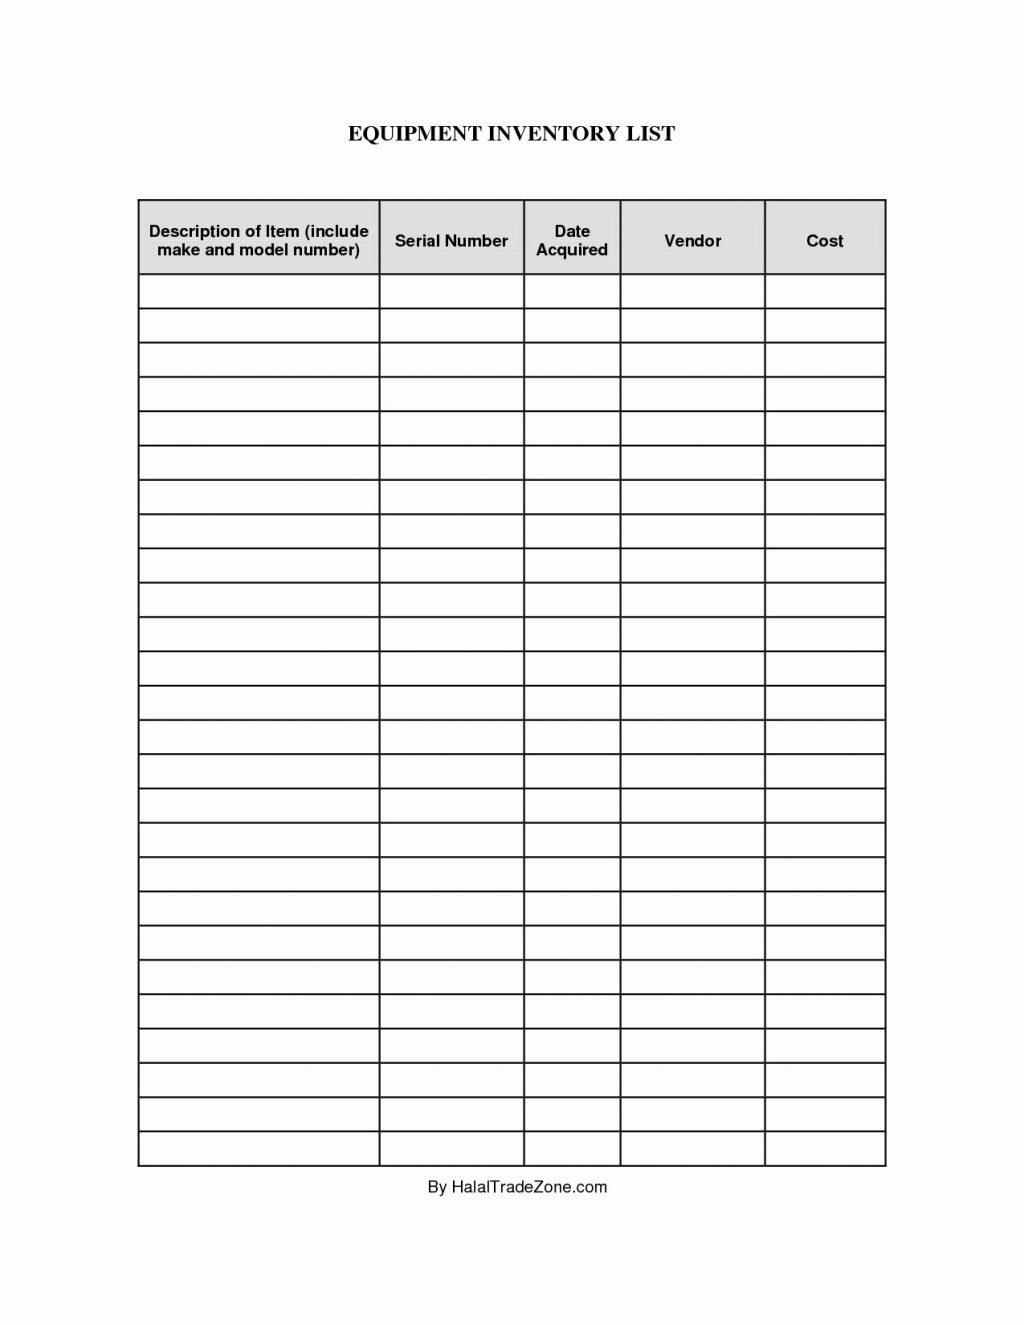 Home Food Inventory Spreadsheet Throughout Home Food Inventory Spreadsheet Sheetutiful Storage Blue  Askoverflow